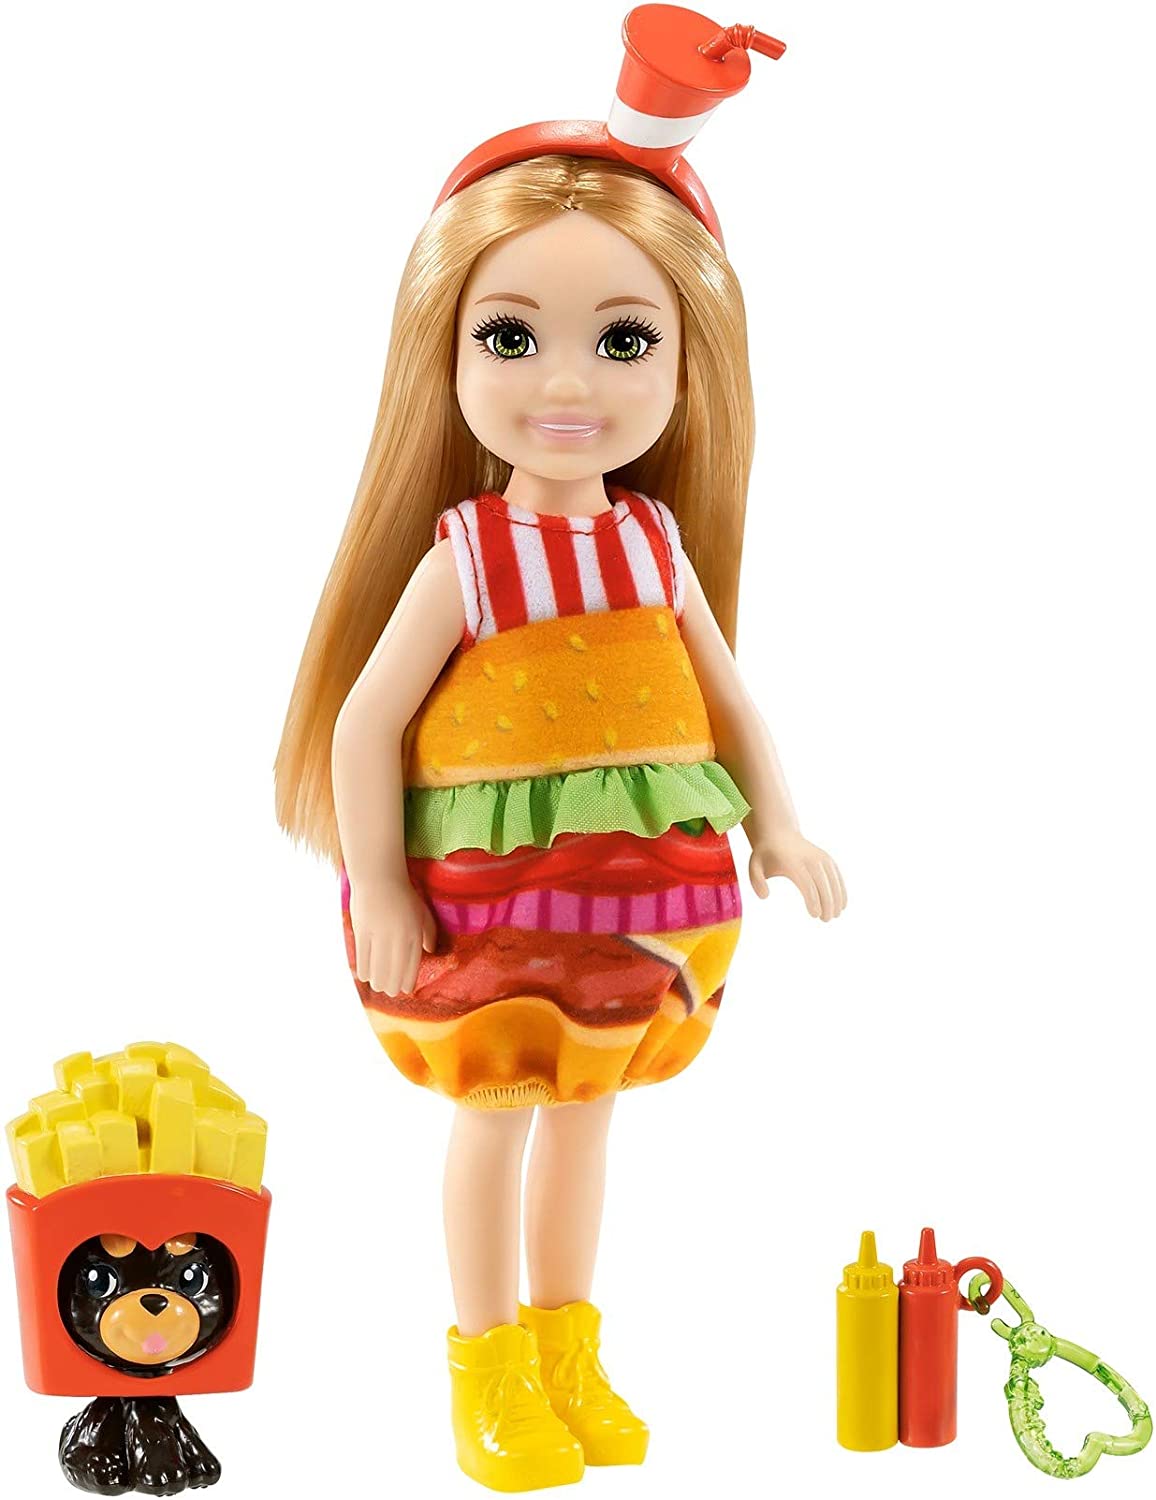 Mattel - Barbie Club Chelsea, Burger Dress-Up Costume Doll with